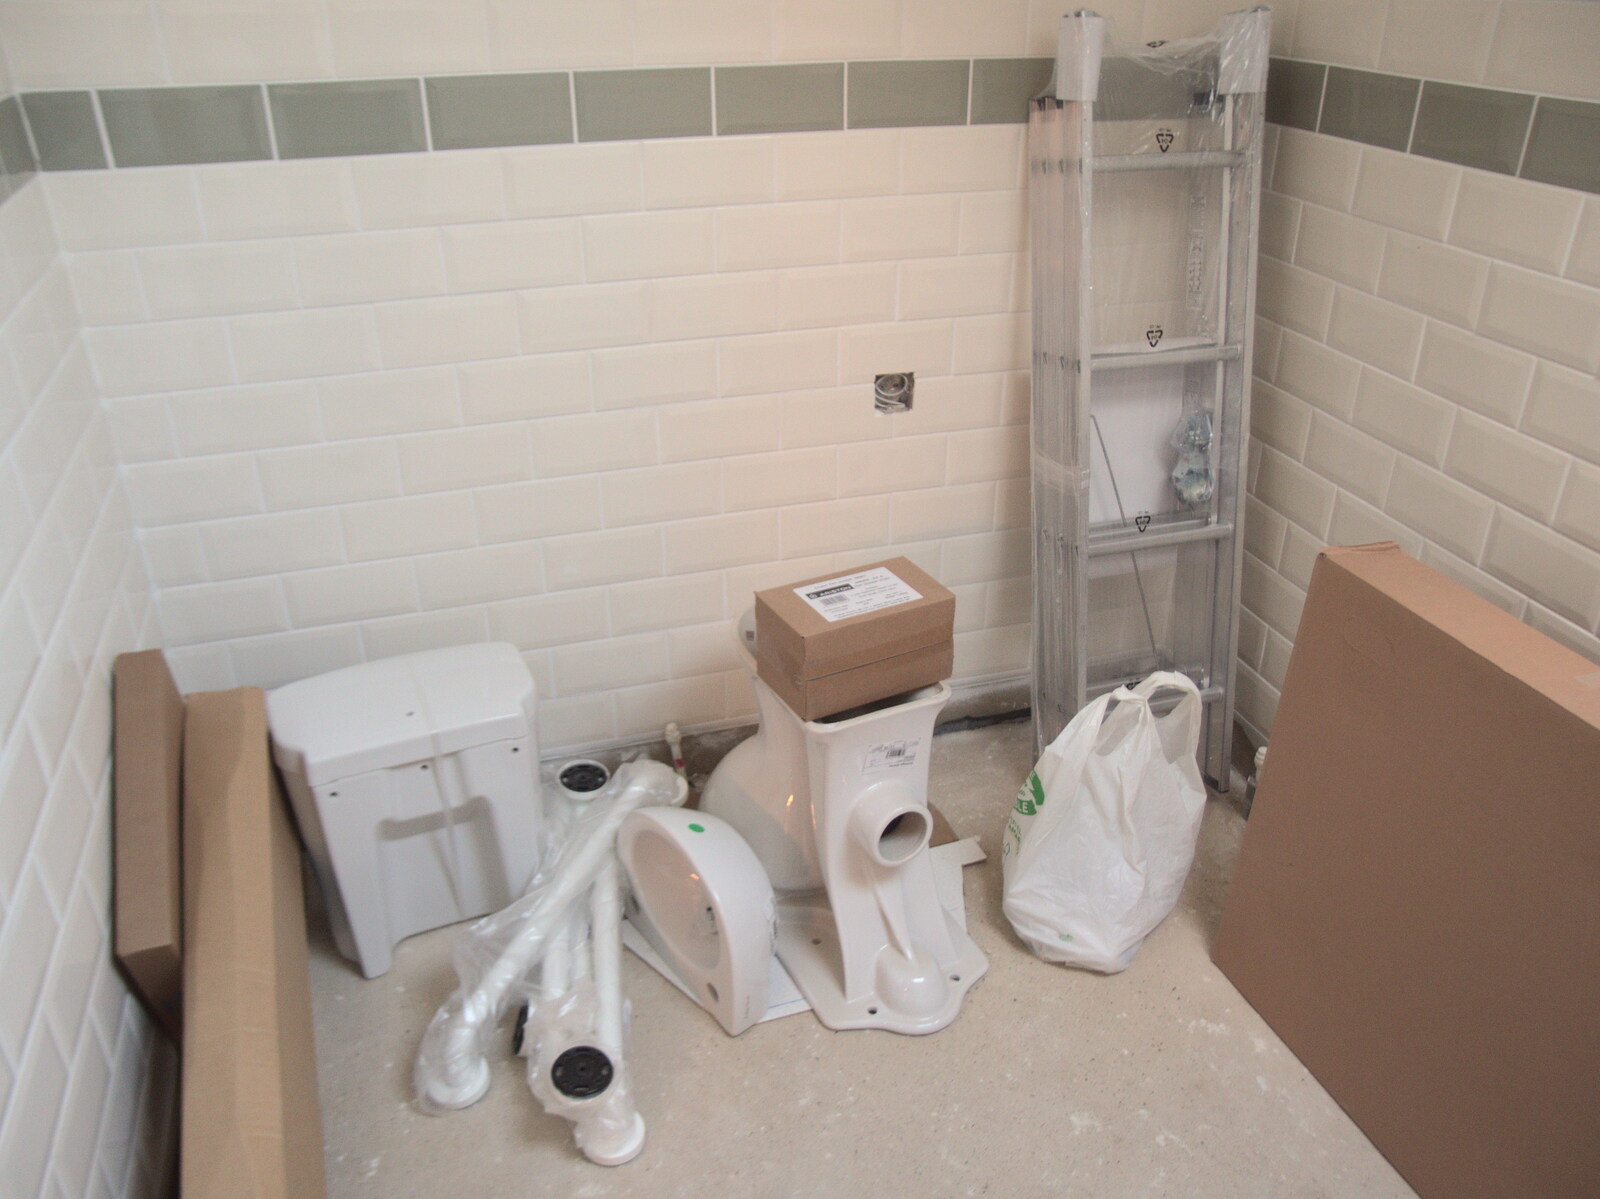 The village hall gets some fancy new disabled bogs from Pizza at the Village Hall, Brome, Suffolk - 24th June 2022